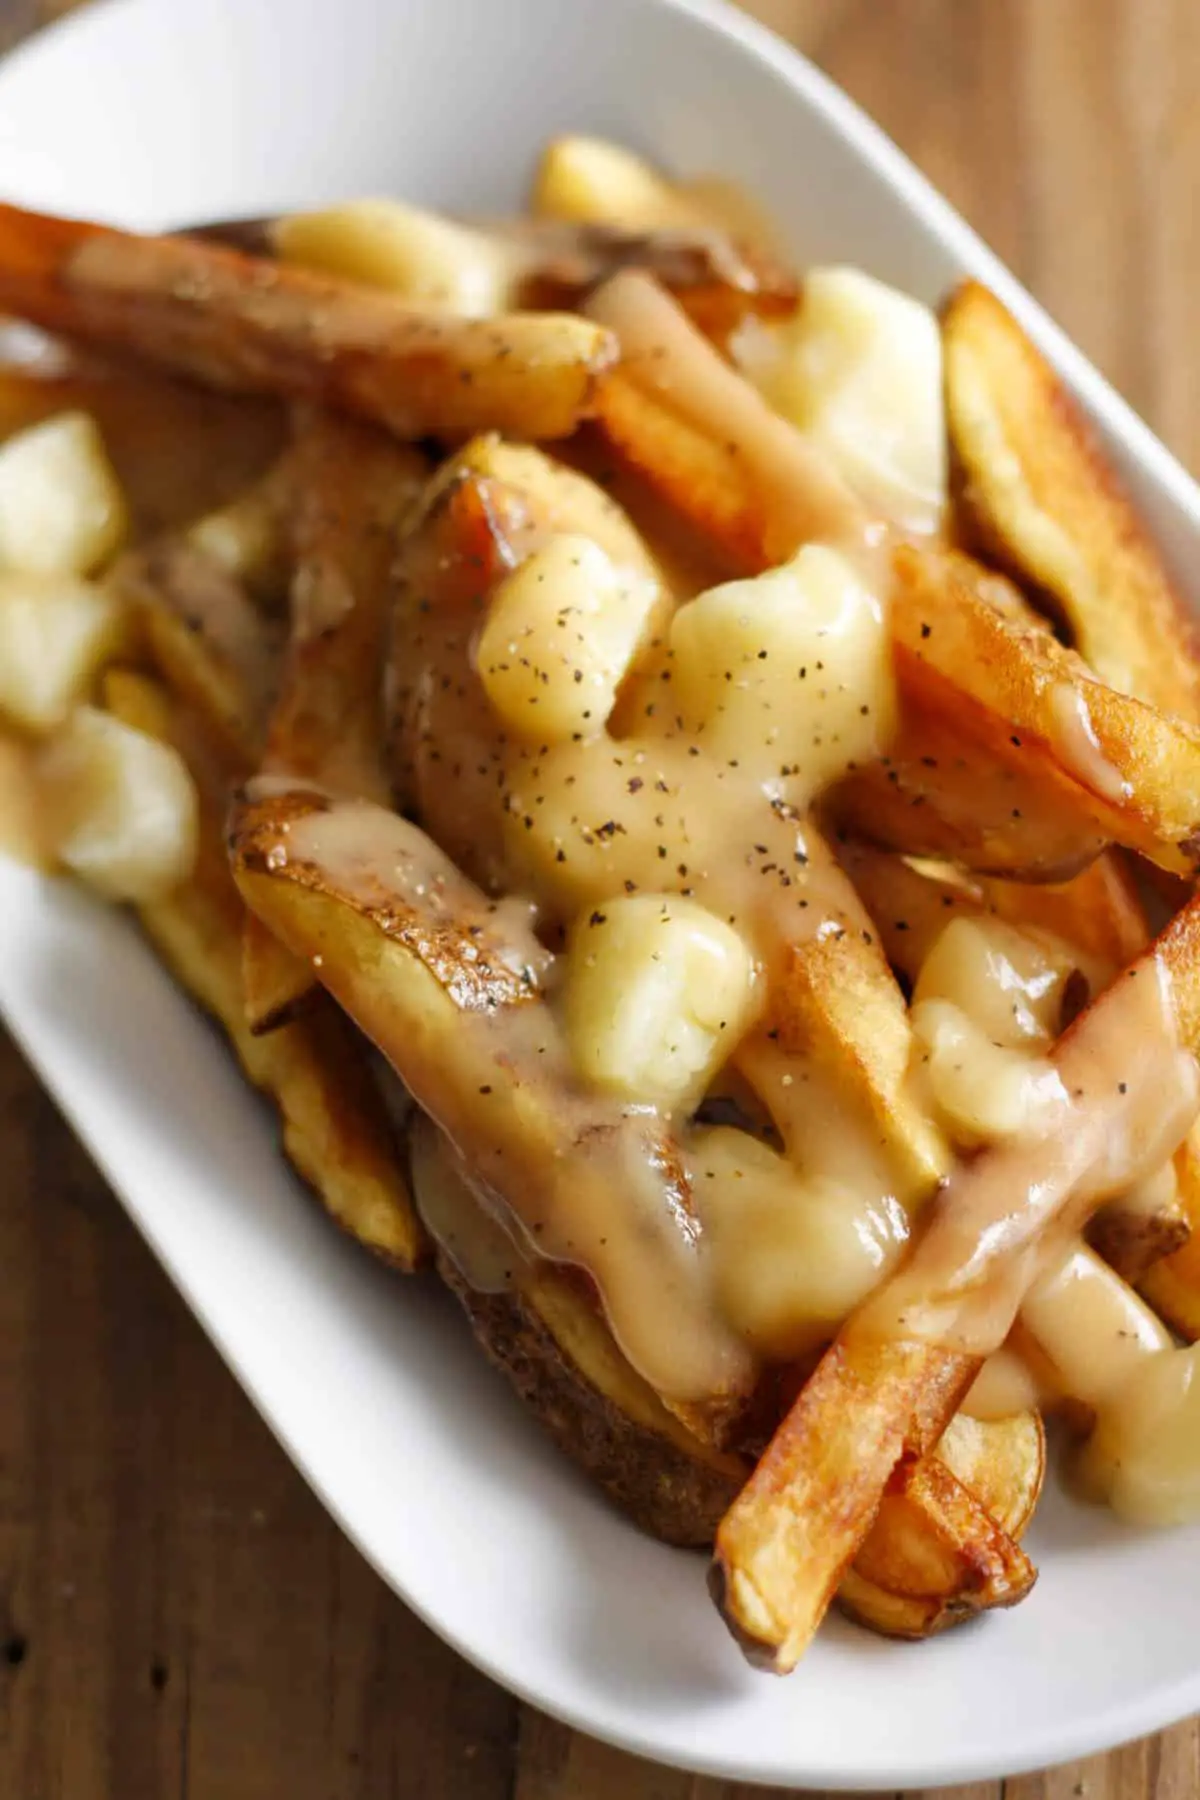 Poutine consisting of fries covered with cheese curds and gravy in a white dish